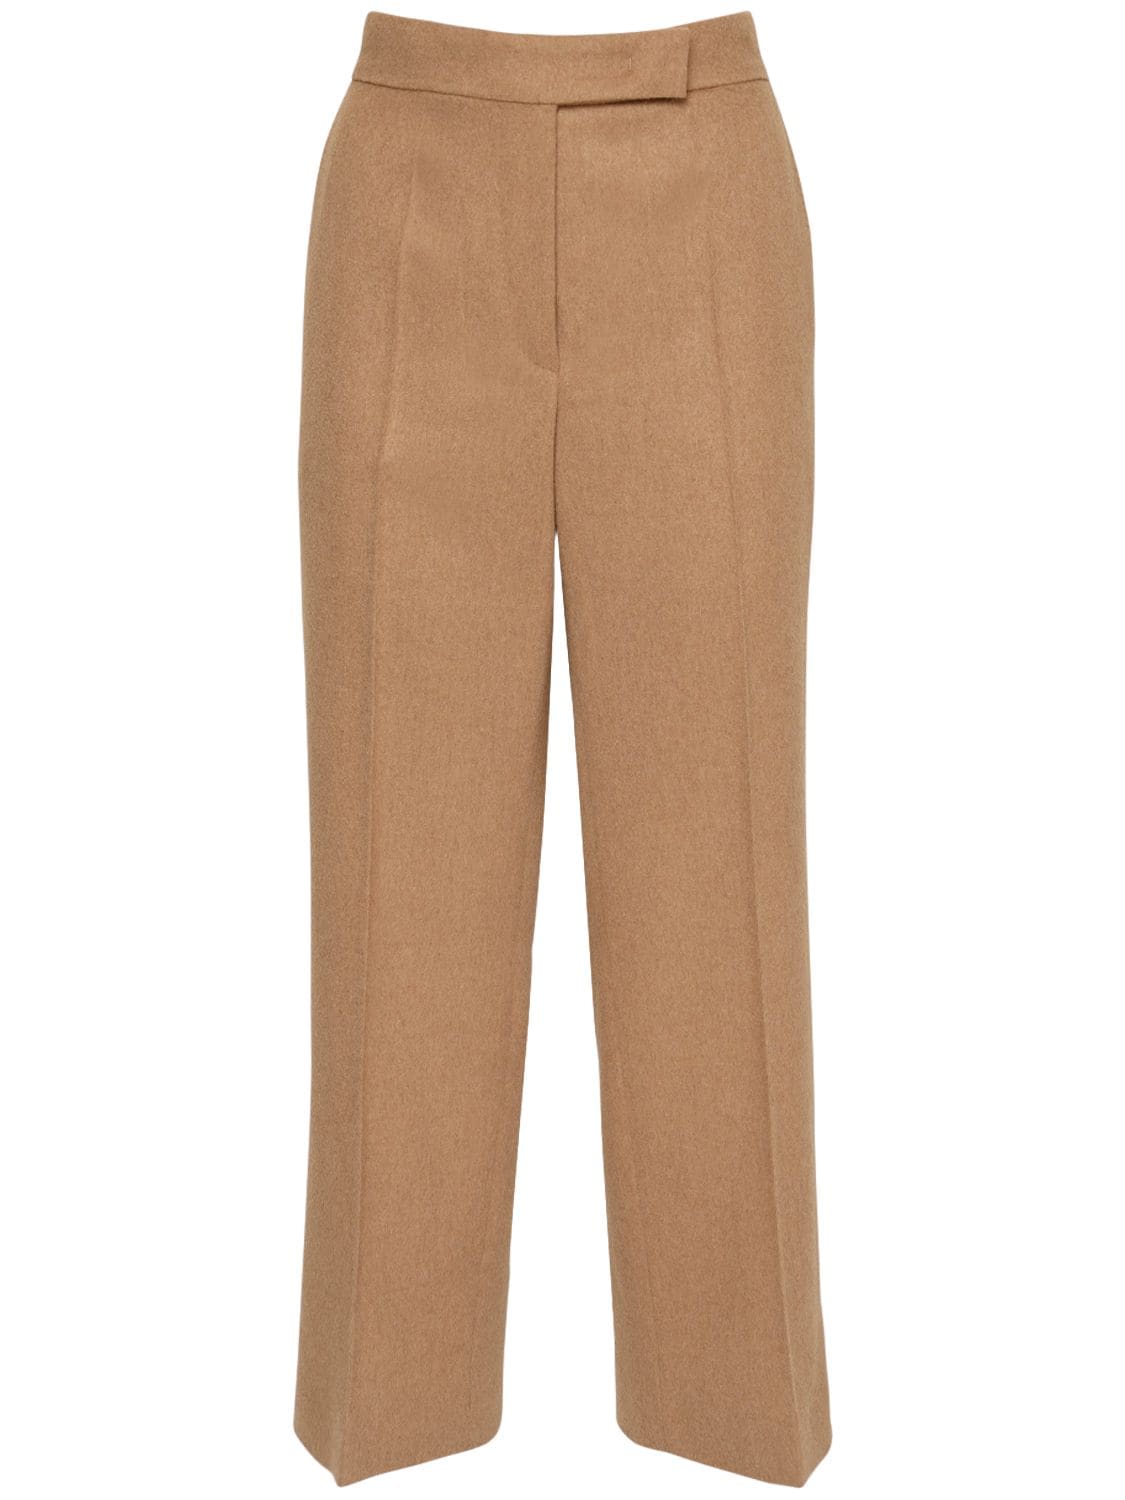 Max Mara Cropped Camel Trousers W/ Satin Side Bands